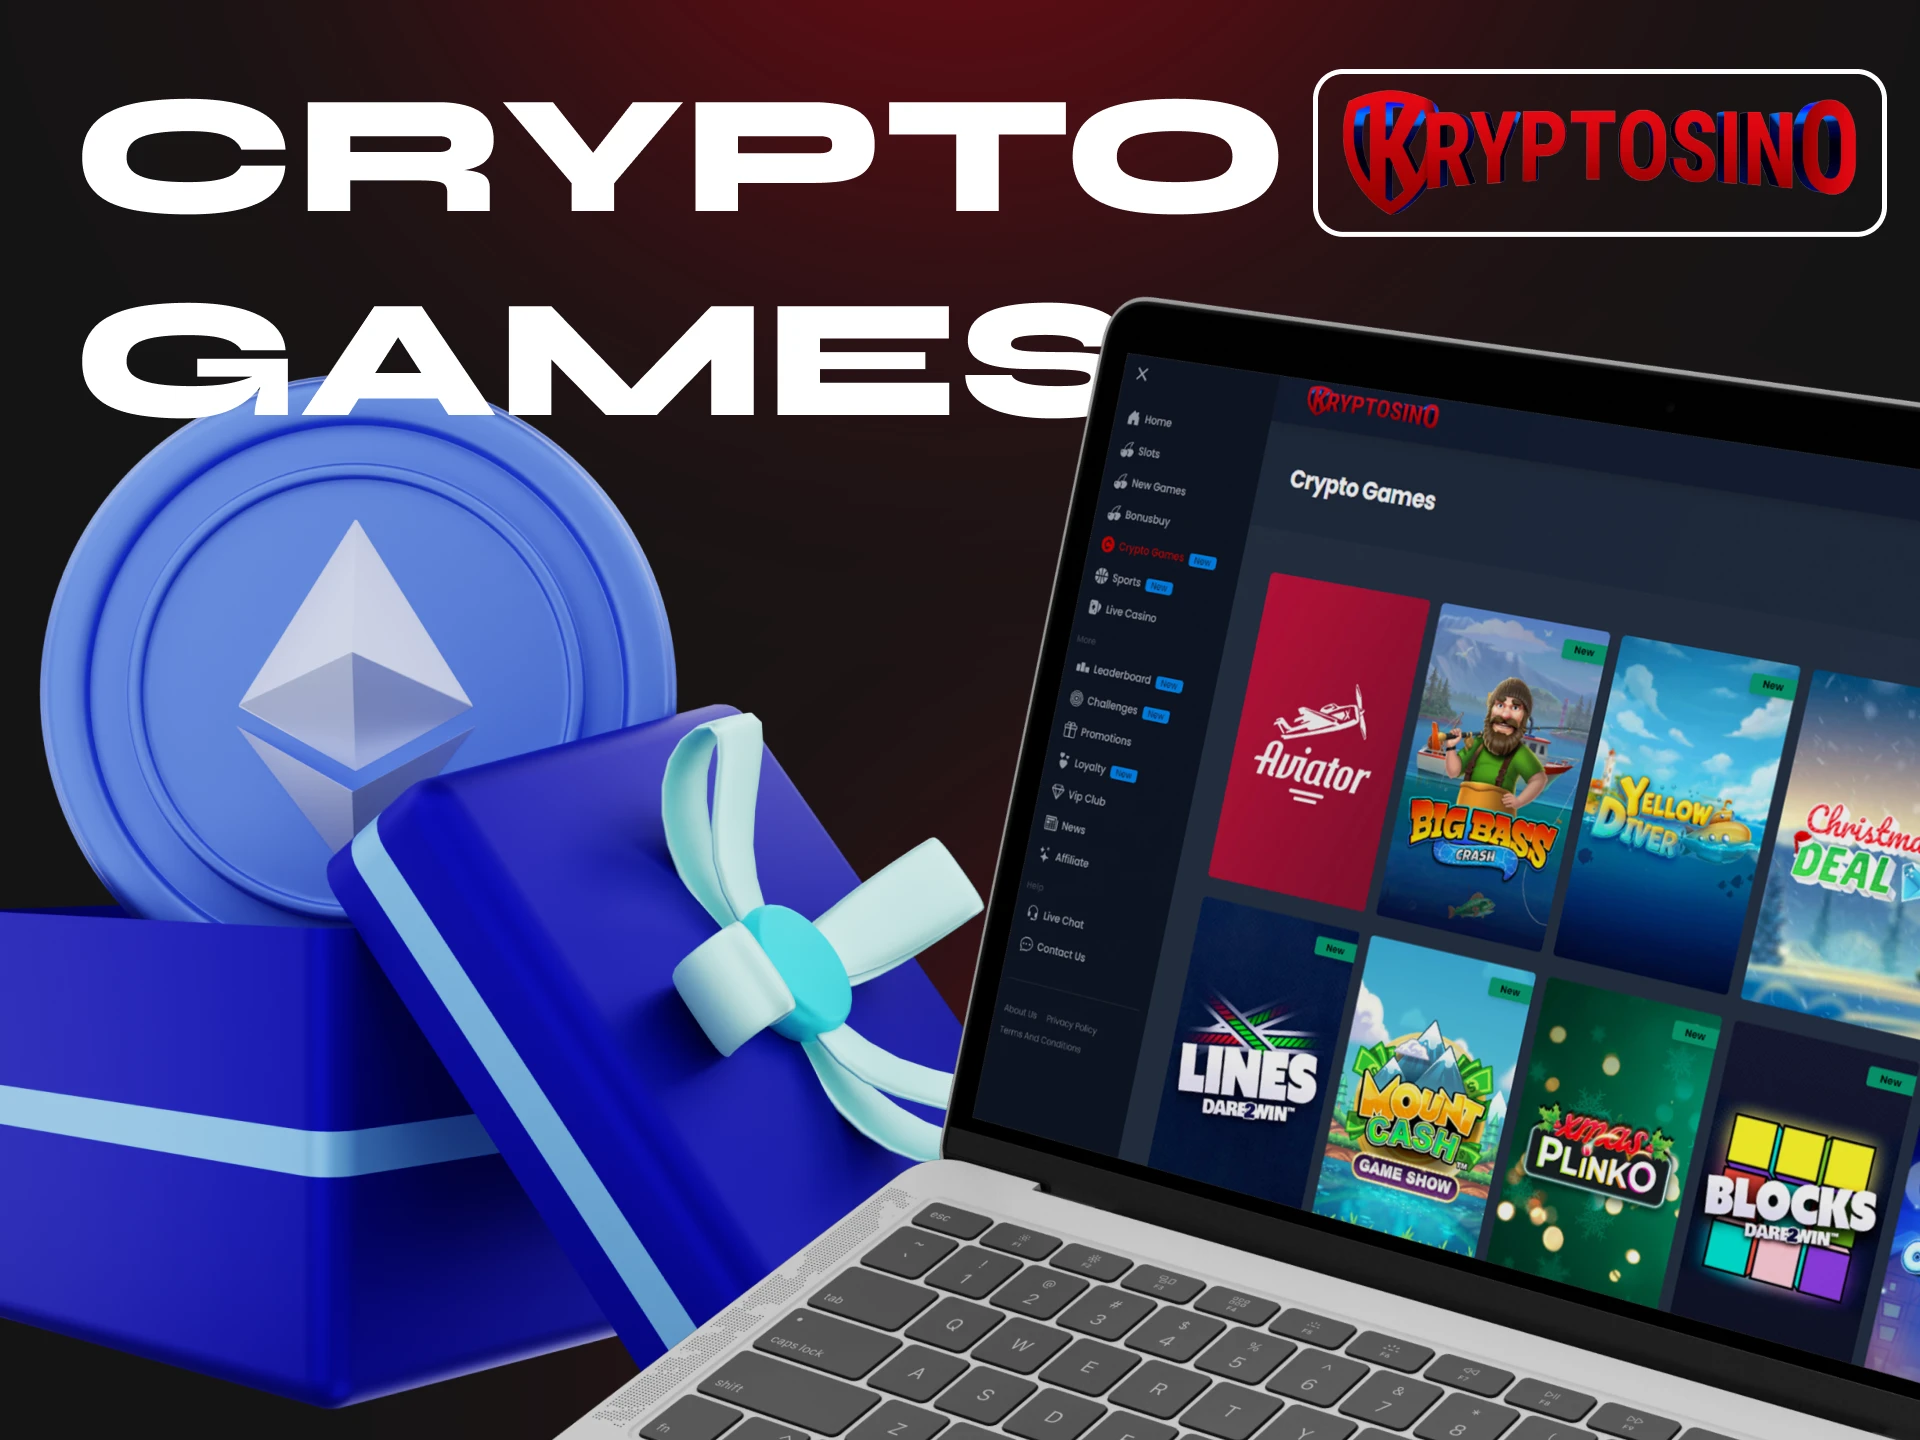 Play games for cryptocurrency at Kryptosino Casino.